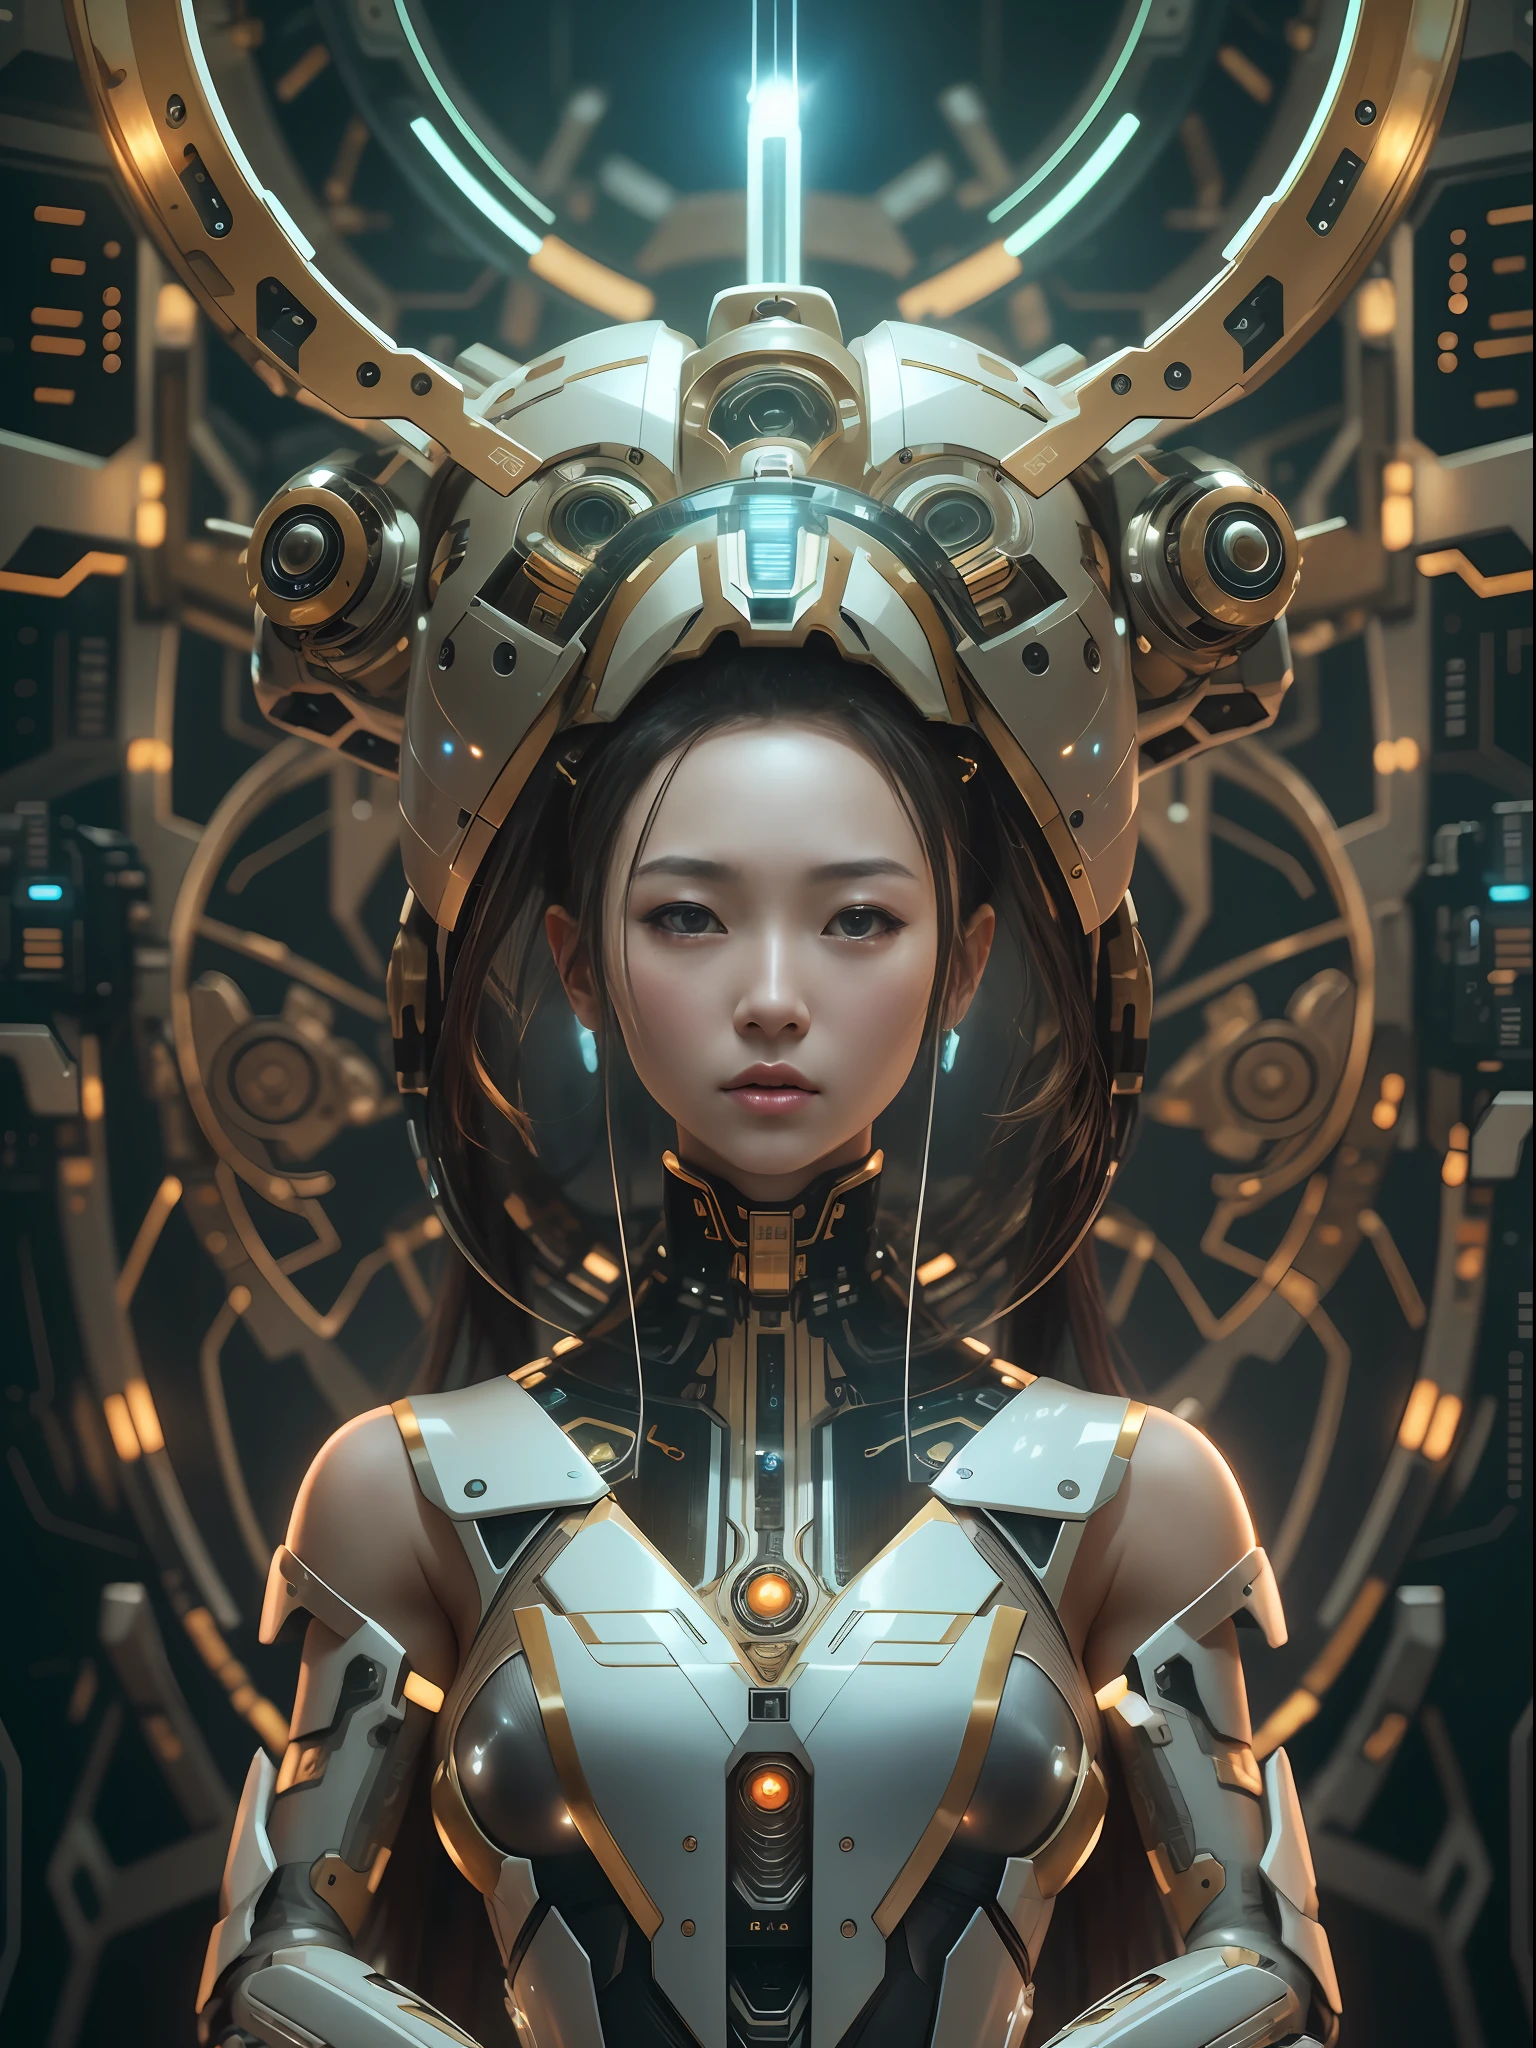 In this breathtaking 8K portrait photo, a beautiful cyborg robot girl in the style of "Goddess of Victory Nikke" captivates with intricate and elegant details. Her skin is formed by digital optical fiber, creating a mesmerizing effect under soft and volumetric lighting. This concept art by the talented artists Otomo Katsuhiro, Hyung-tae Kim, and Oshii Mamoru combines cyberpunk, sci-fi, and fantasy elements with smooth and sharp focus. The comic illustration style adds to the highly detailed and visually stunning portrayal of this futuristic character